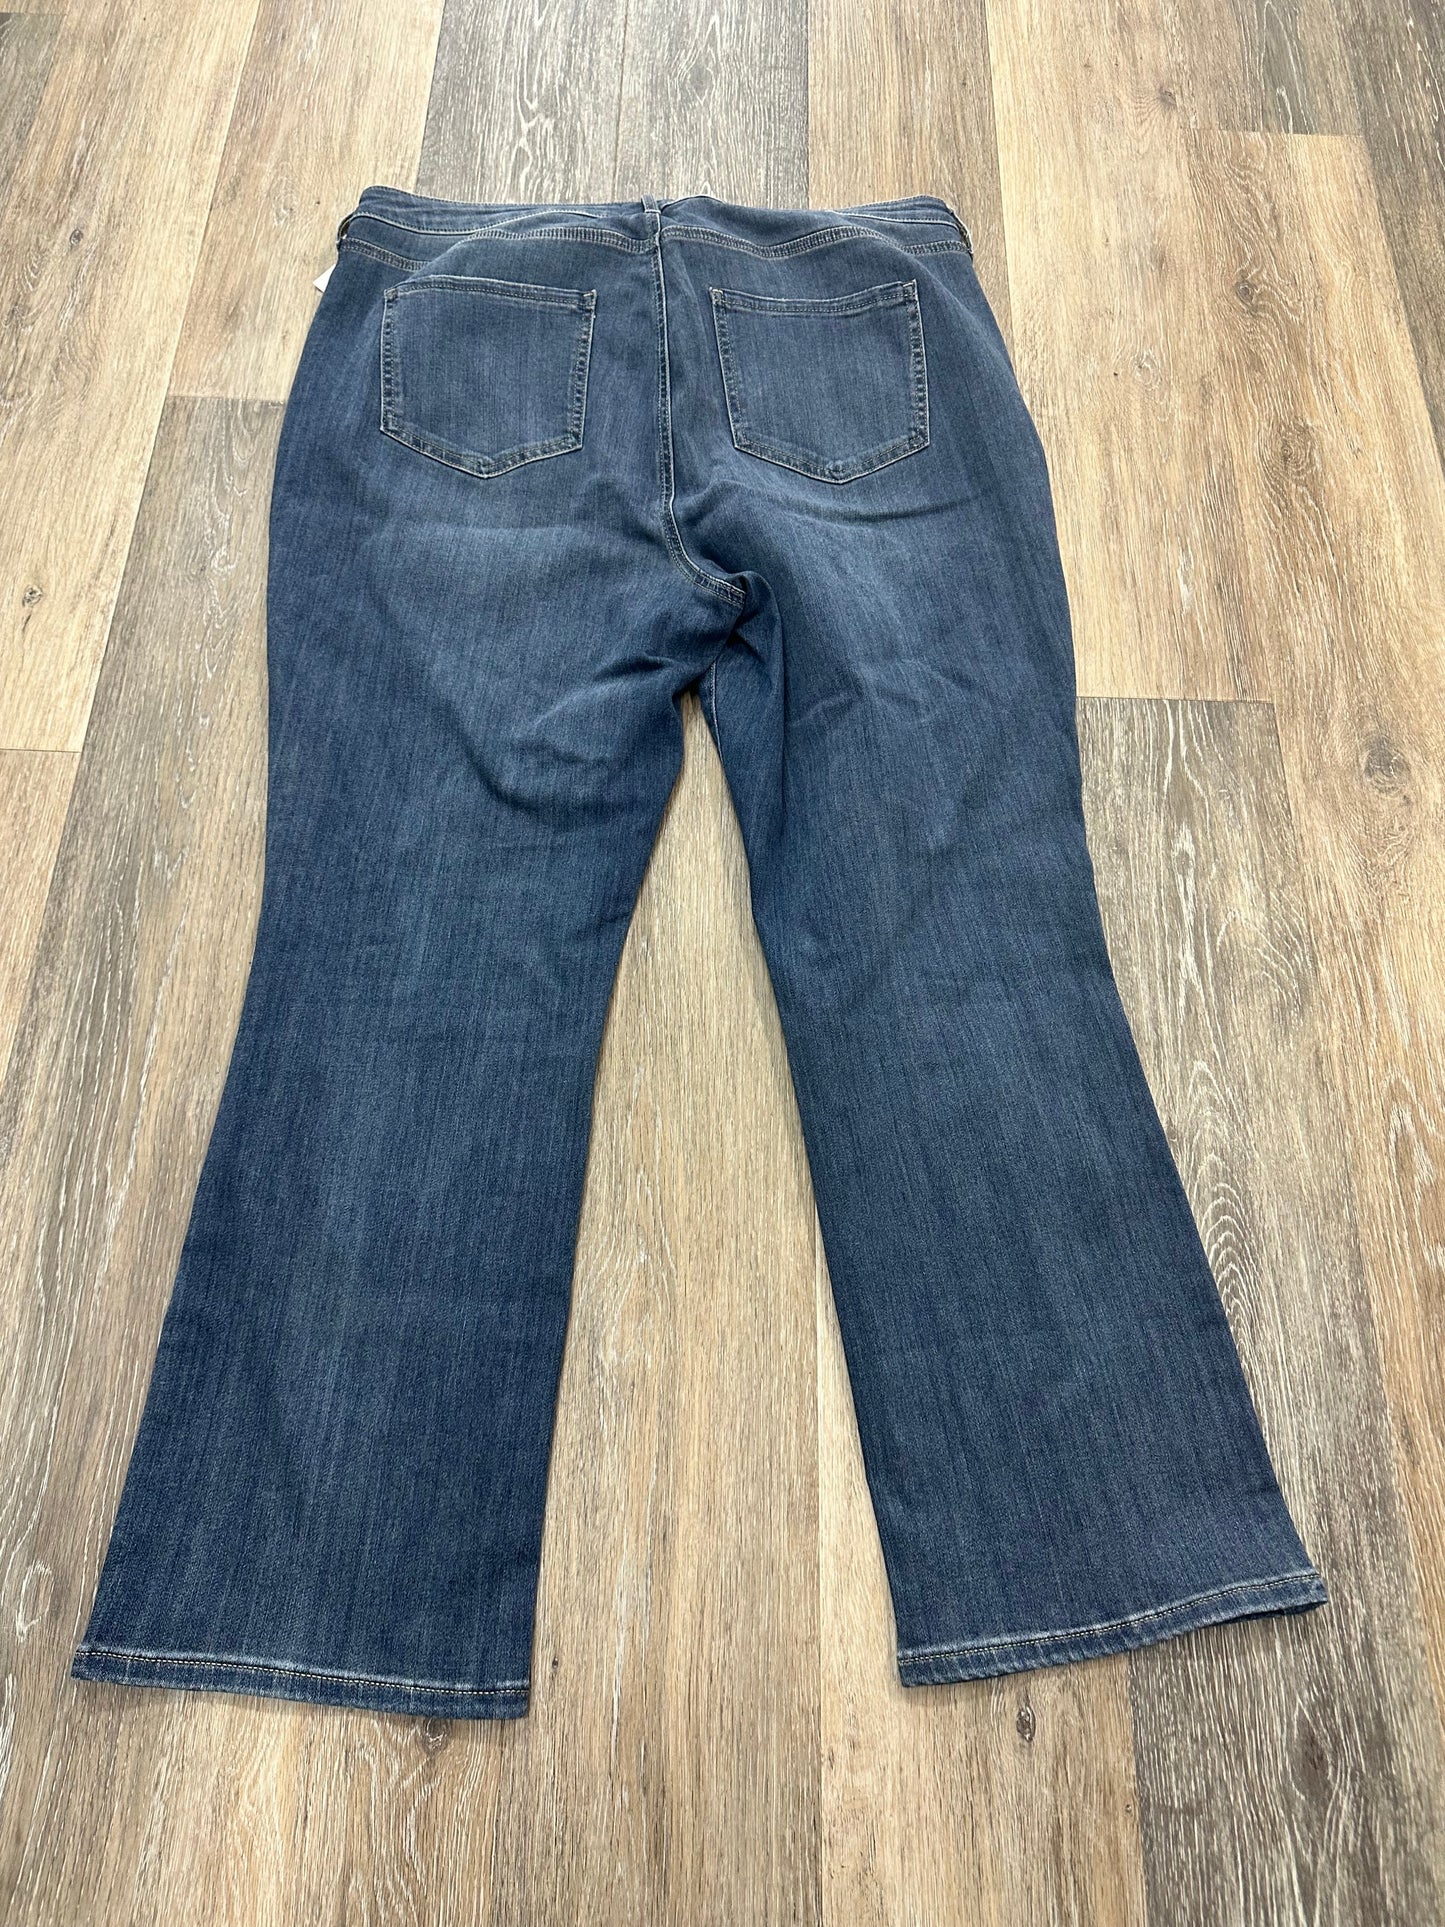 Jeans Boot Cut By Not Your Daughters Jeans  Size: 14